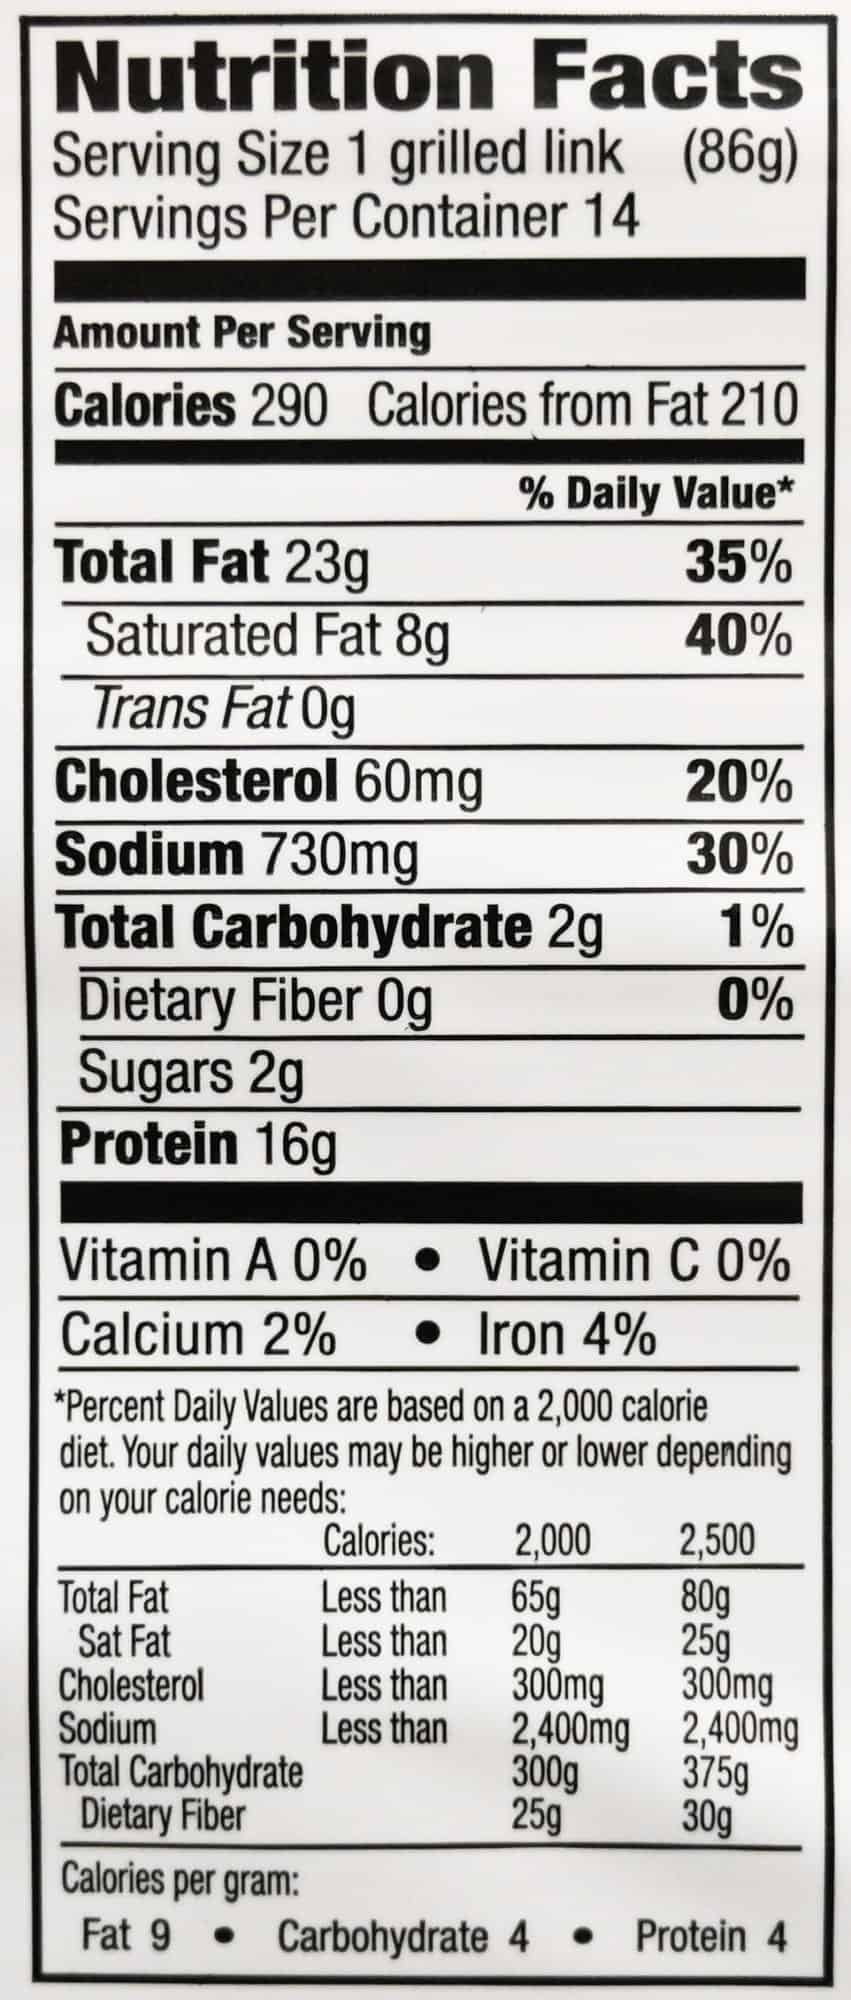 Image of the nutrition facts for the brats from the back of the package.